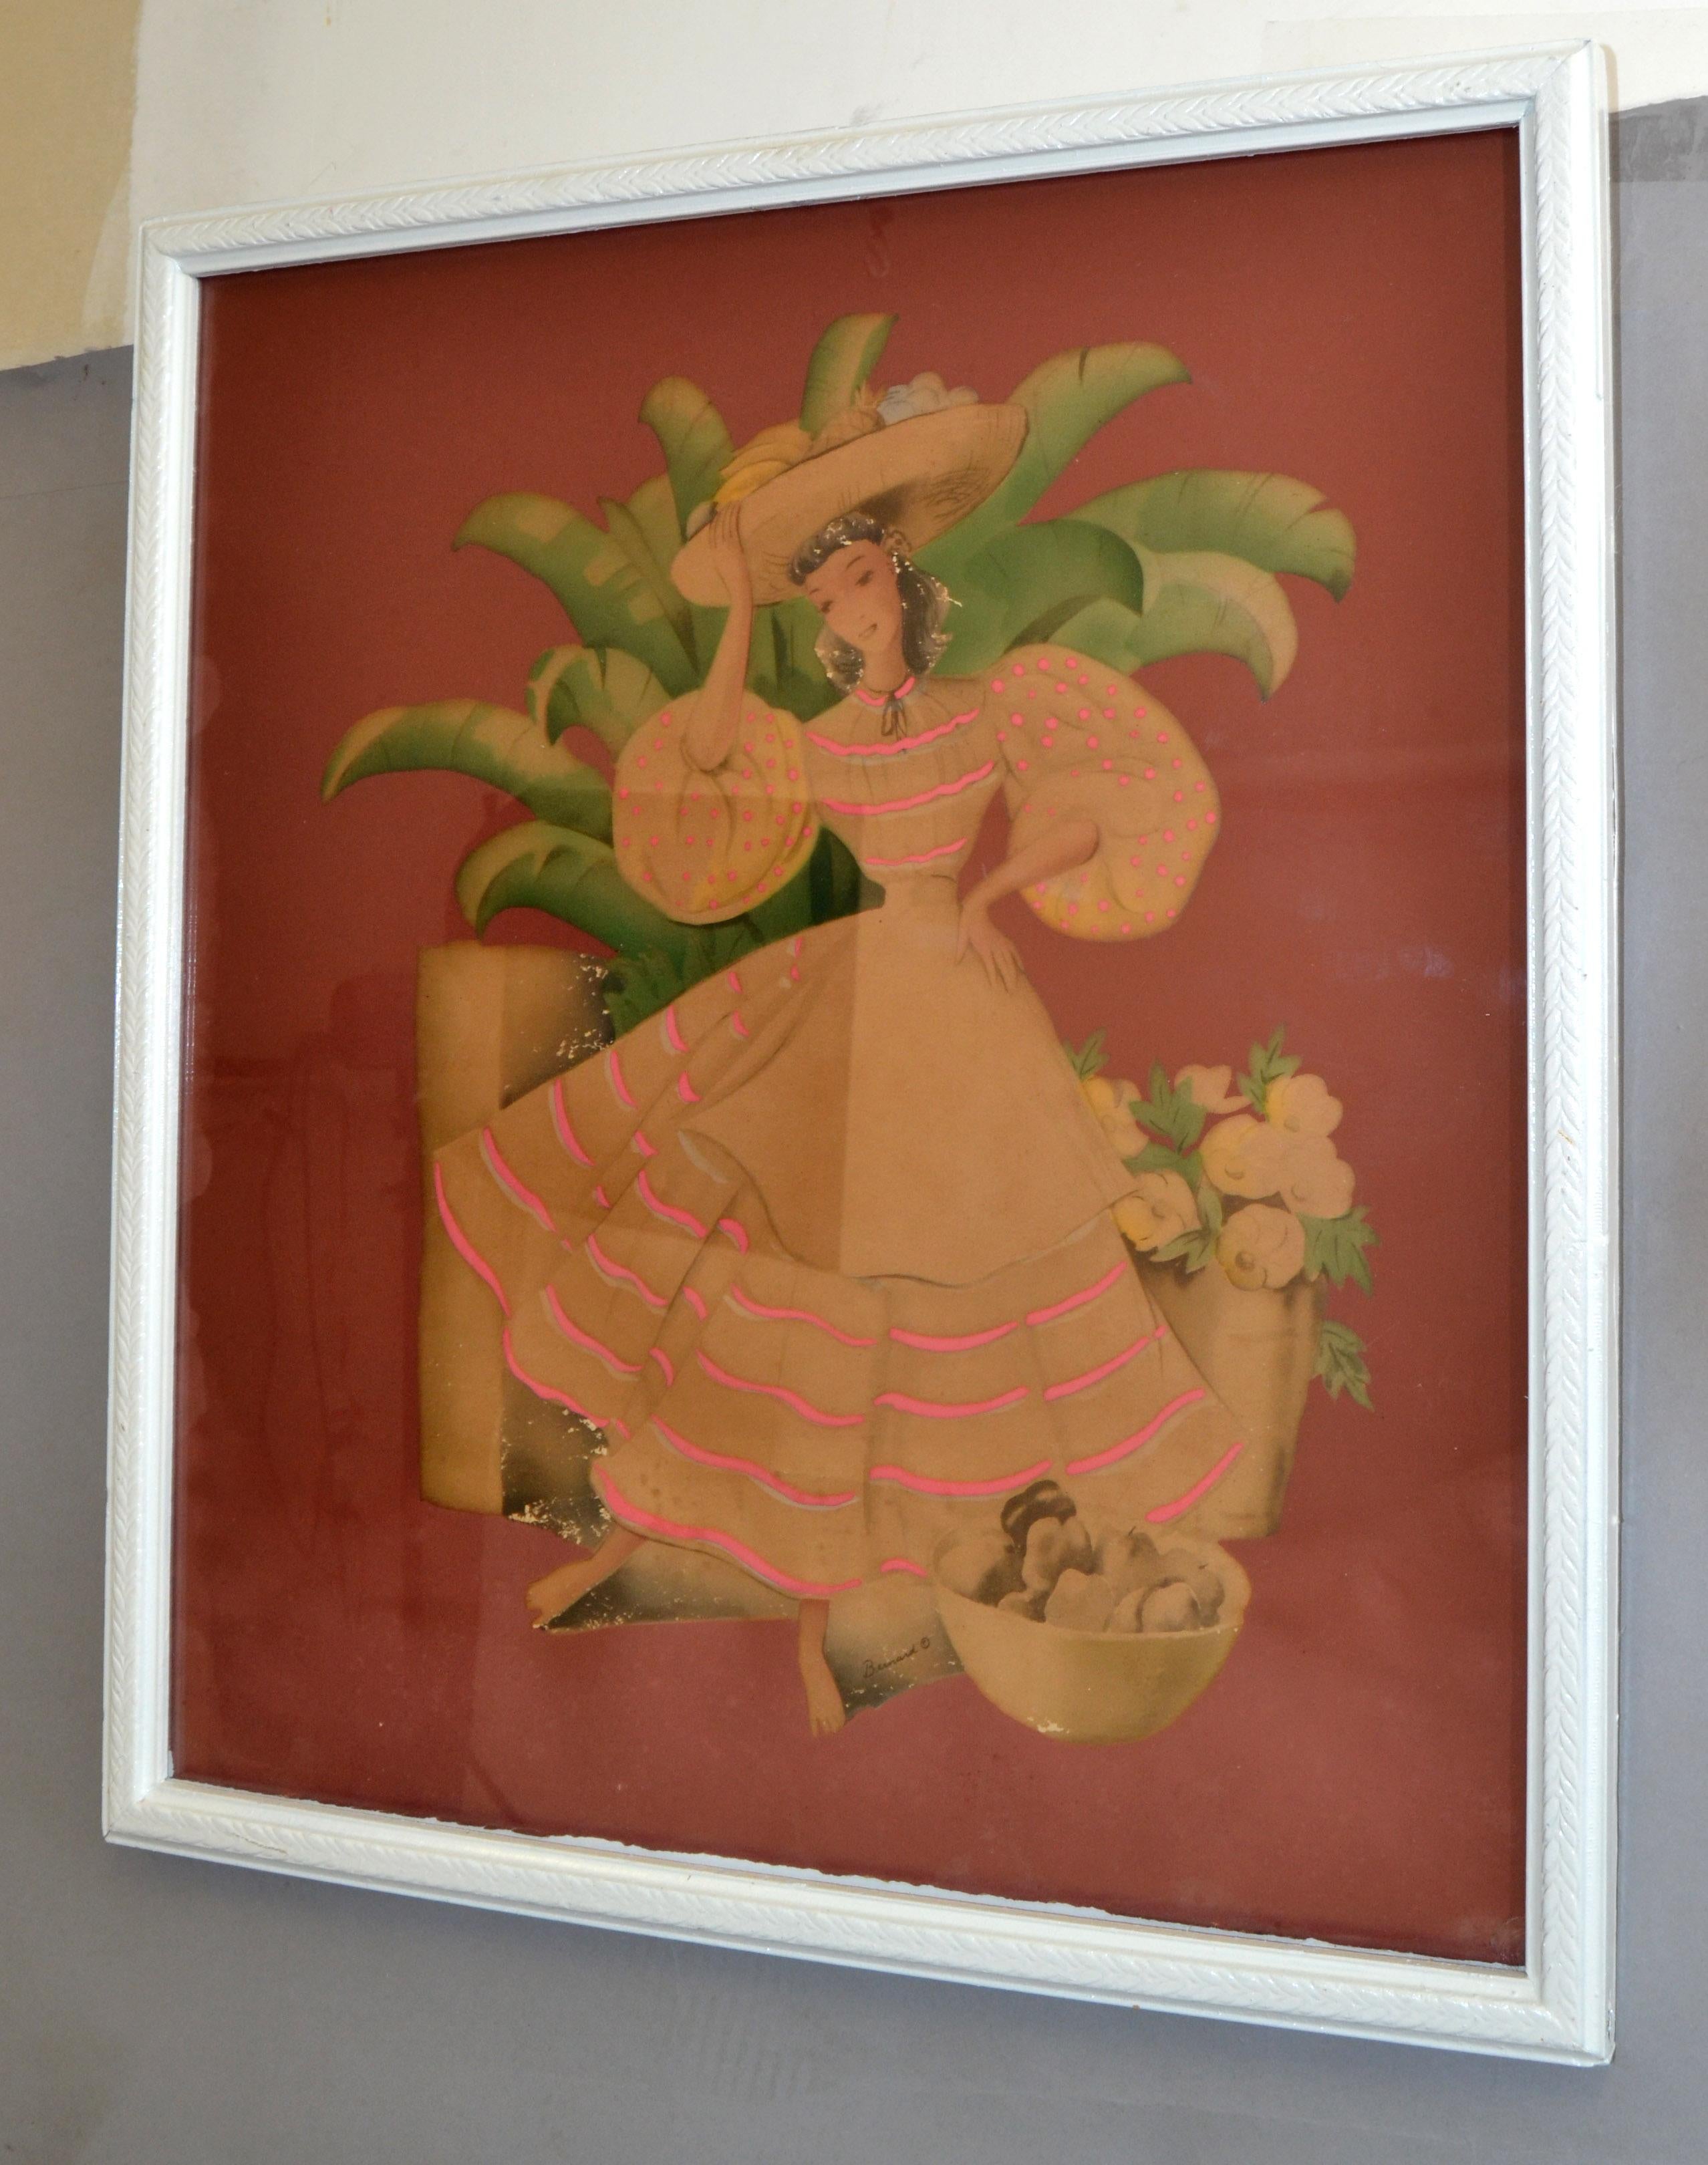 Bernard Watercolor Columbian Woman Carries Fruit Basket Folk Art Ornated Frame   In Good Condition For Sale In Miami, FL